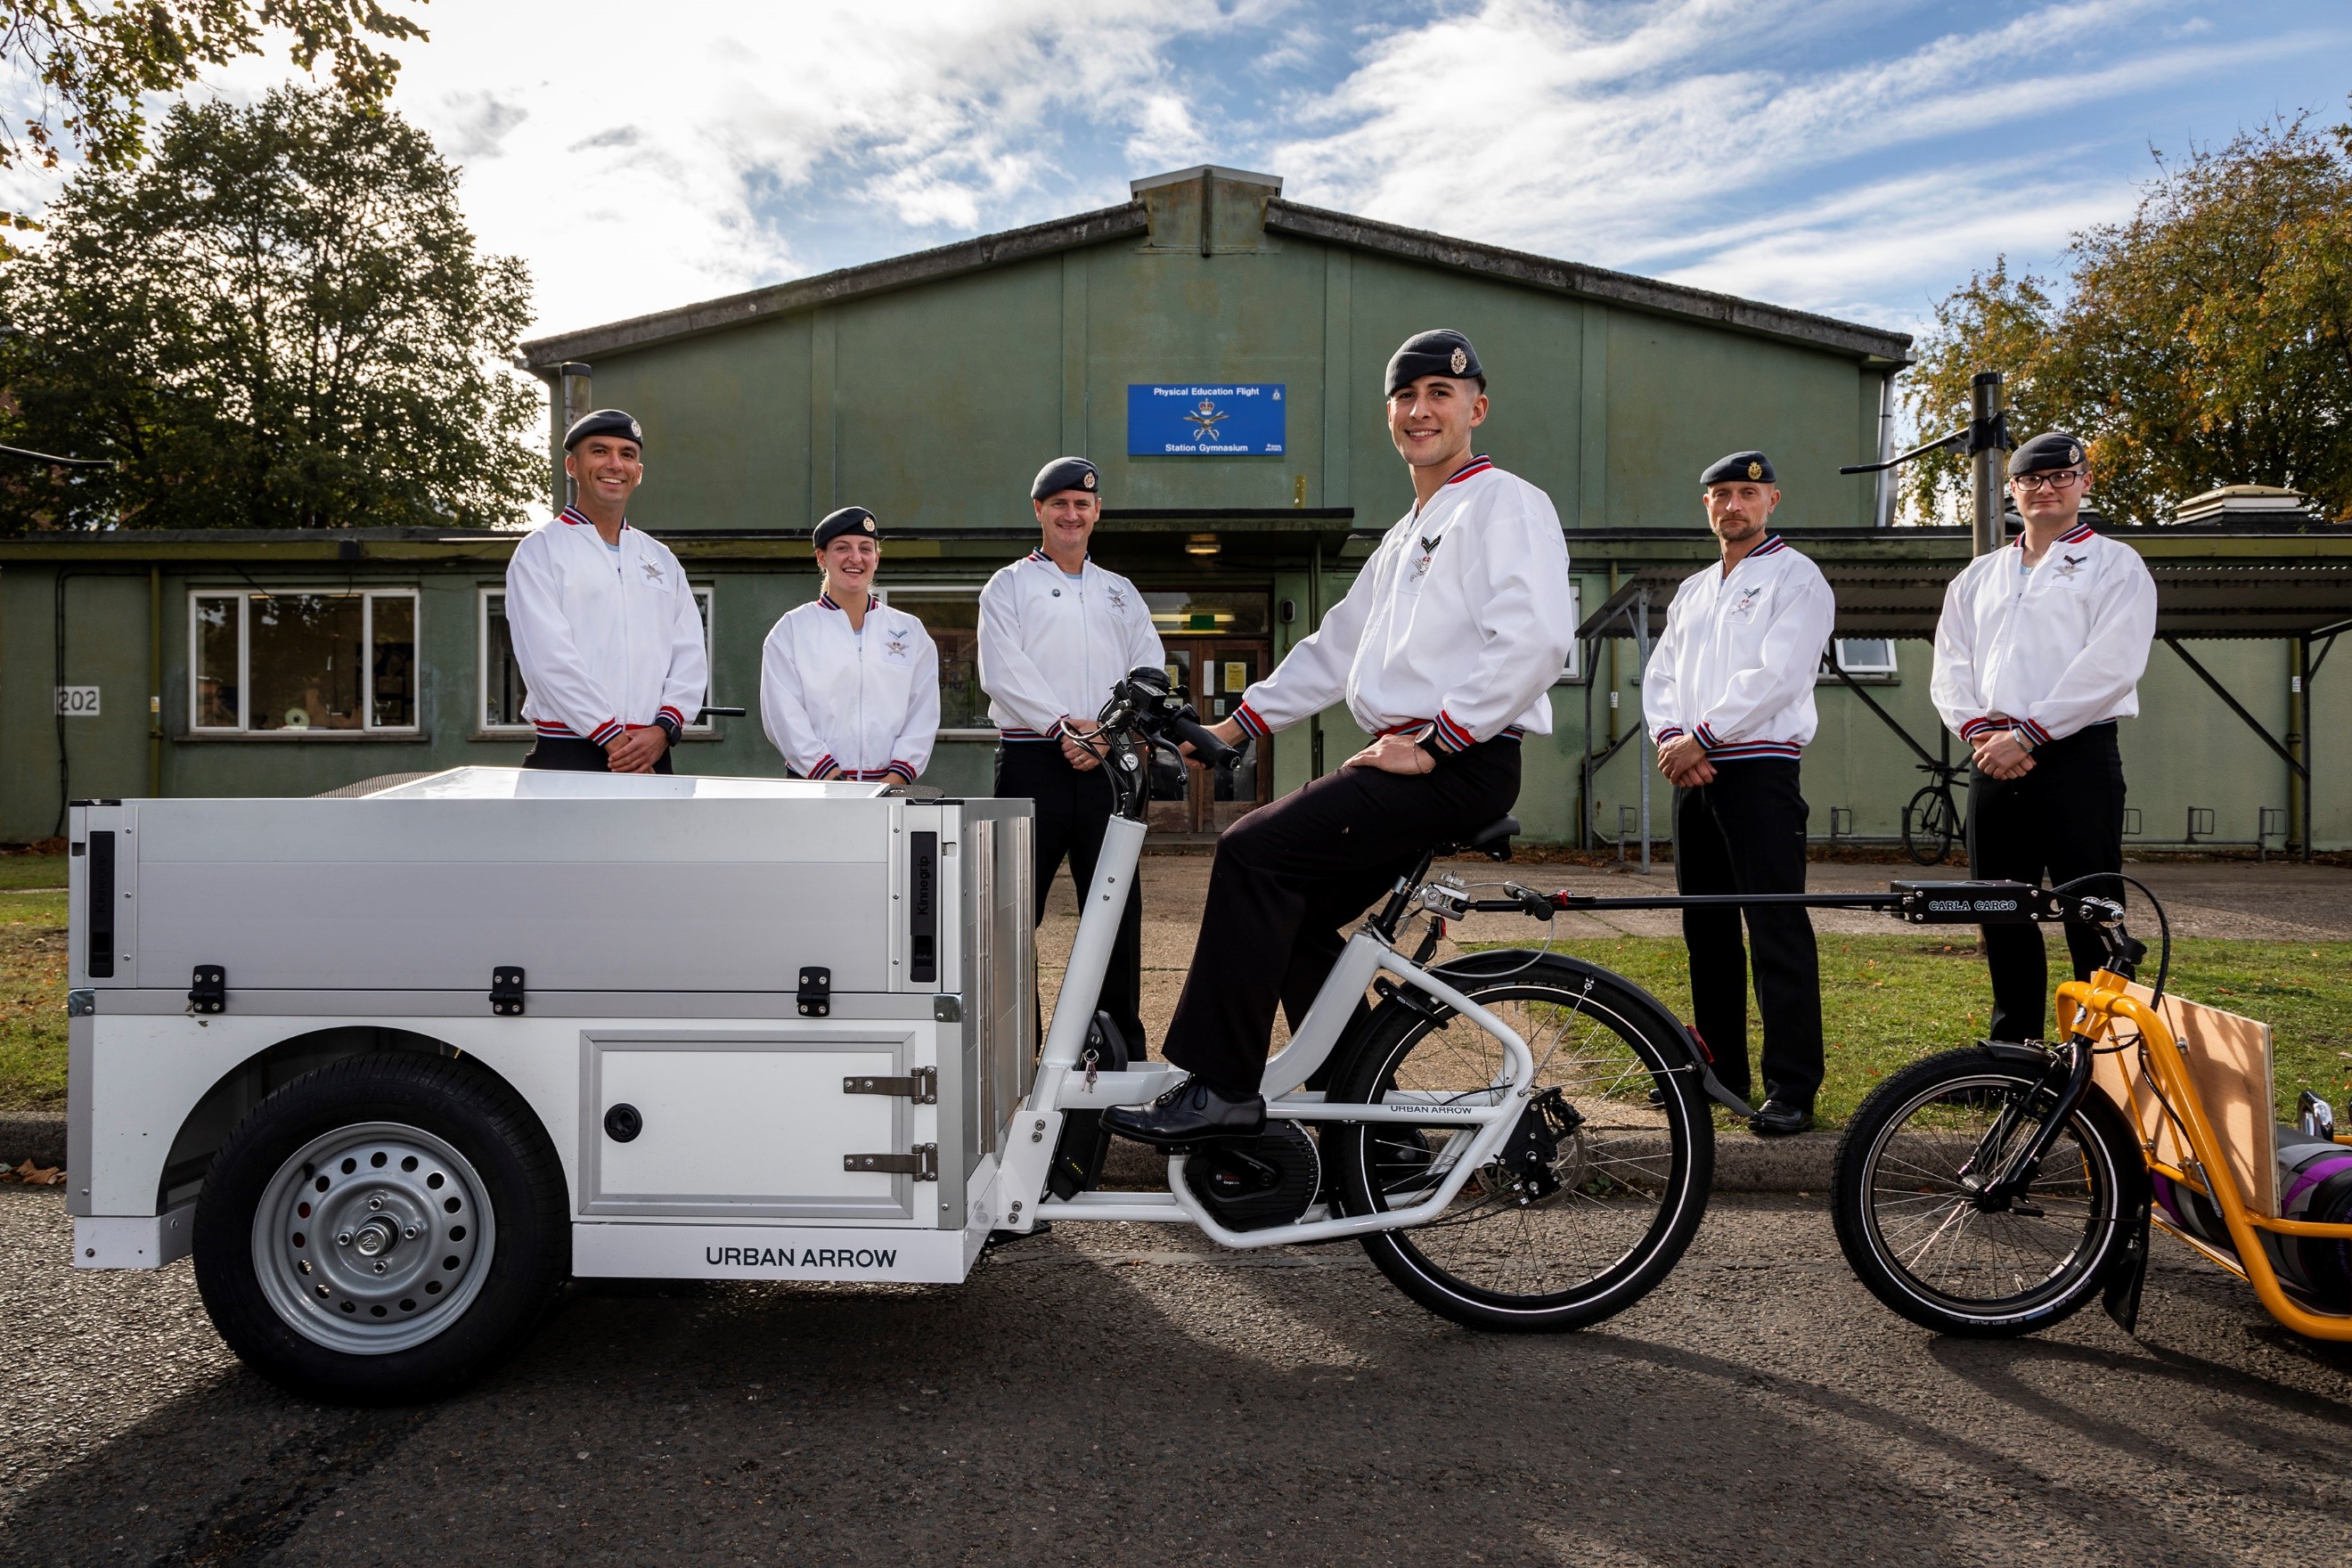 RAF Physical Training Instructors pose with the electric bike